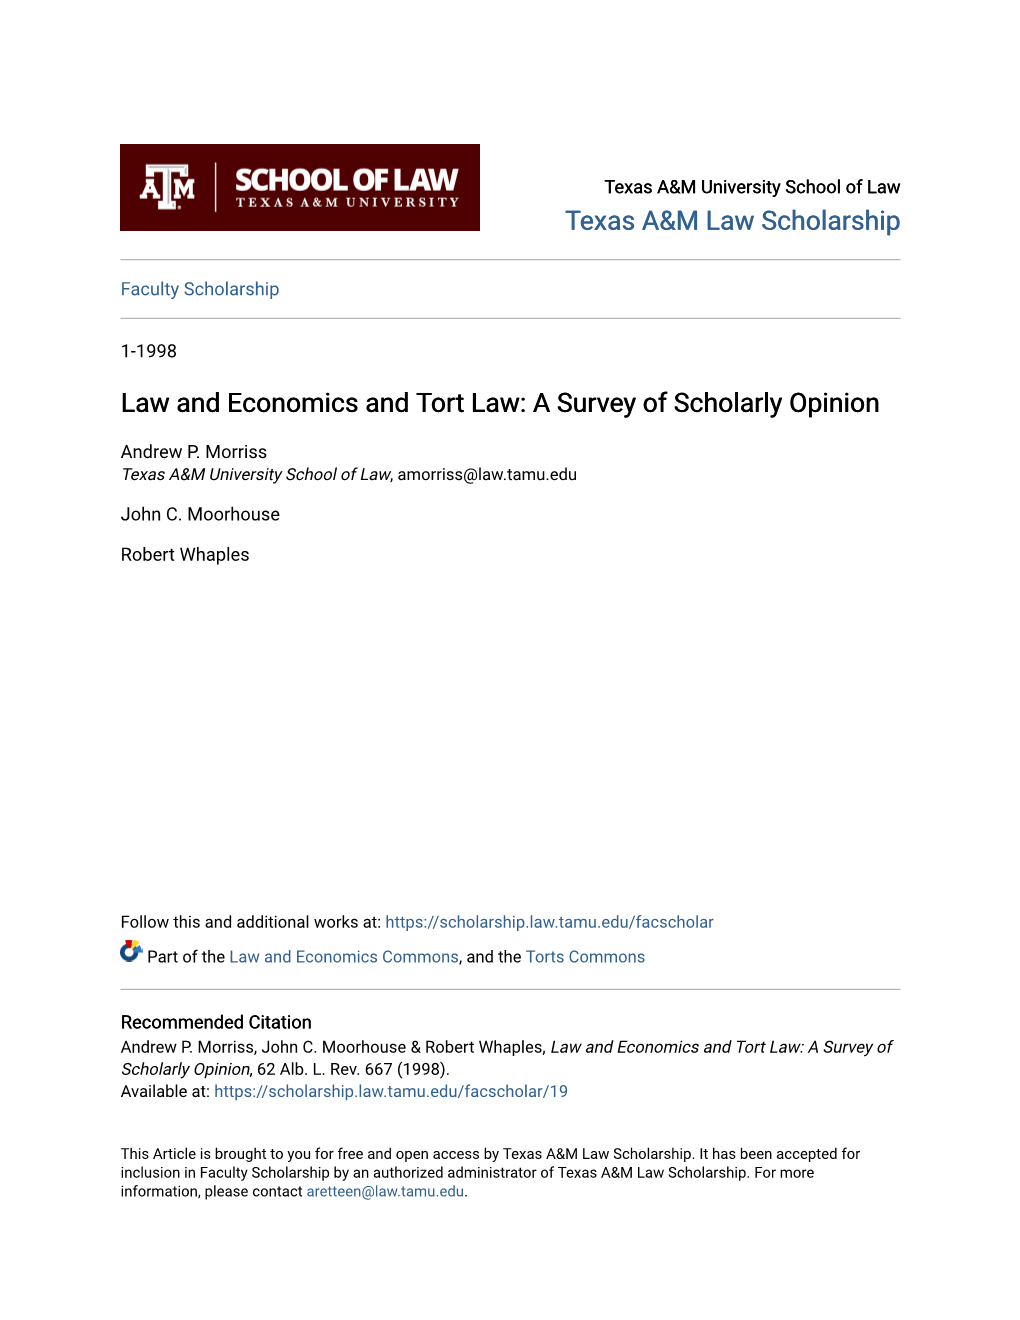 Law and Economics and Tort Law: a Survey of Scholarly Opinion